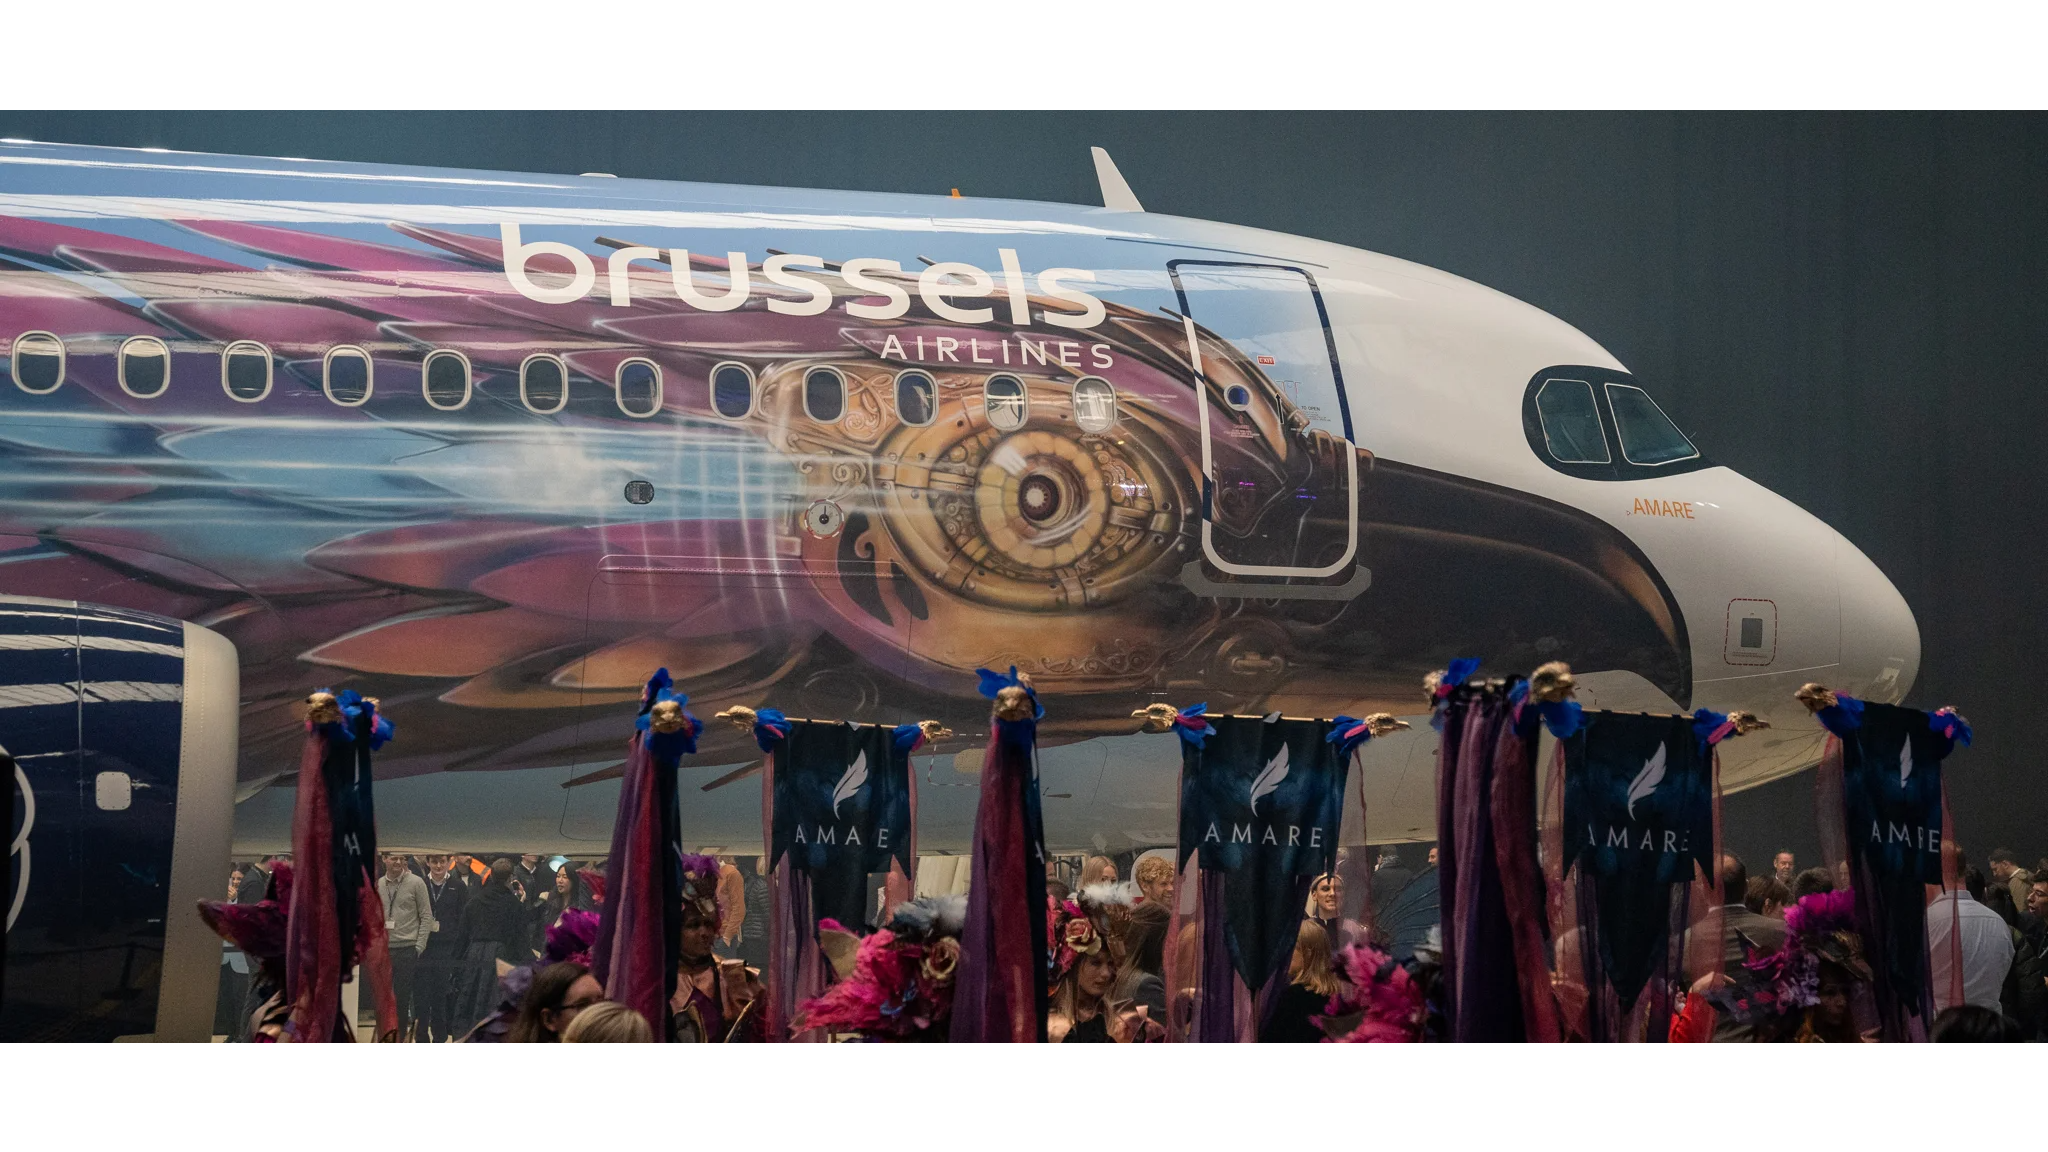 Brussels Airlines new Amare livery